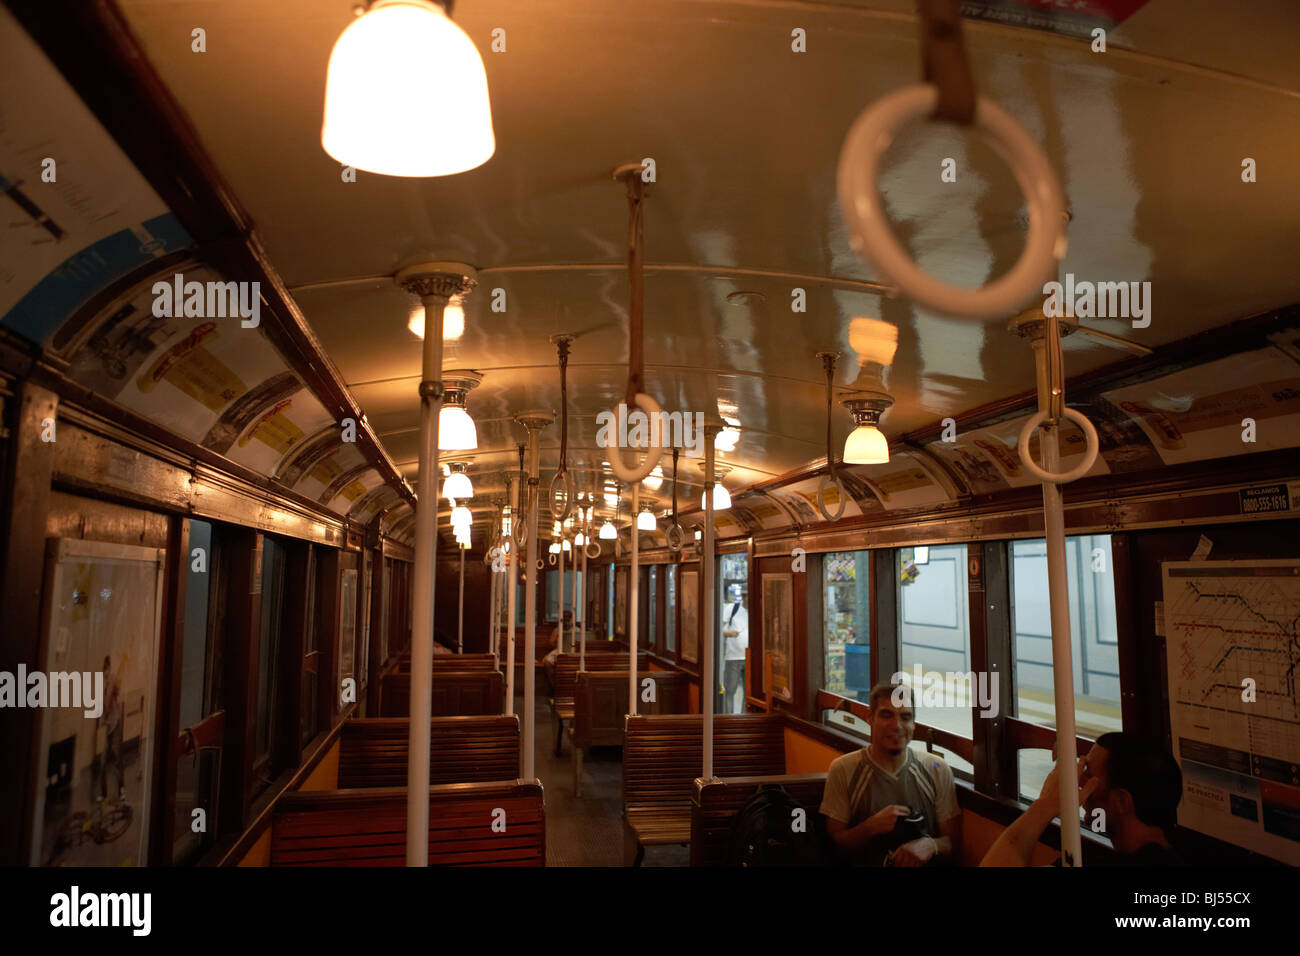 interior of old the brugeois subte subway car of the historic linea a first underground line in capital federal Stock Photo